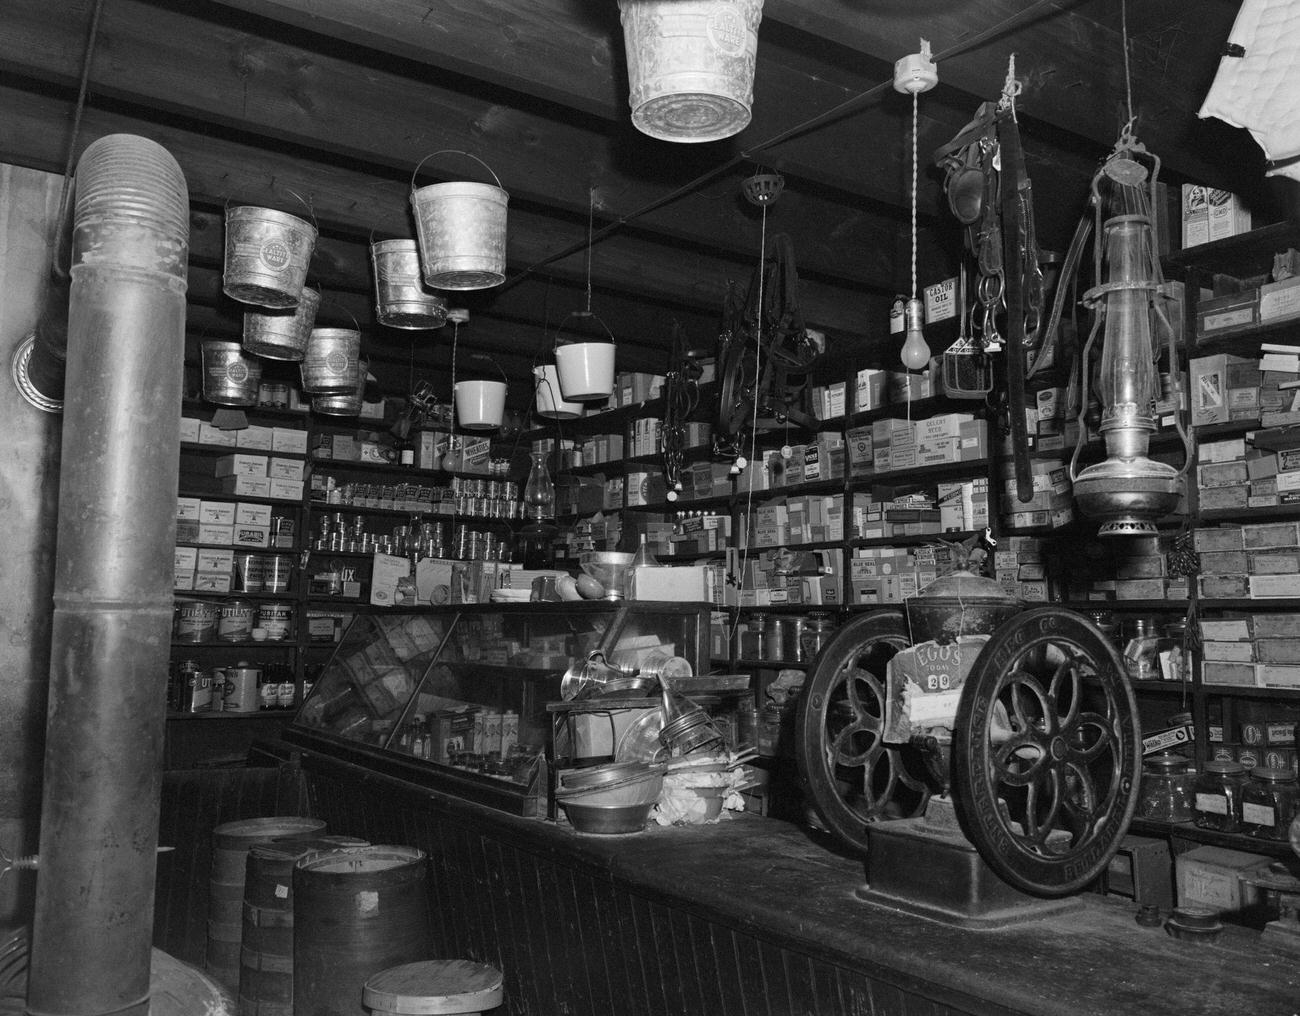 Country General Store Interior, Shiloh, 1900s